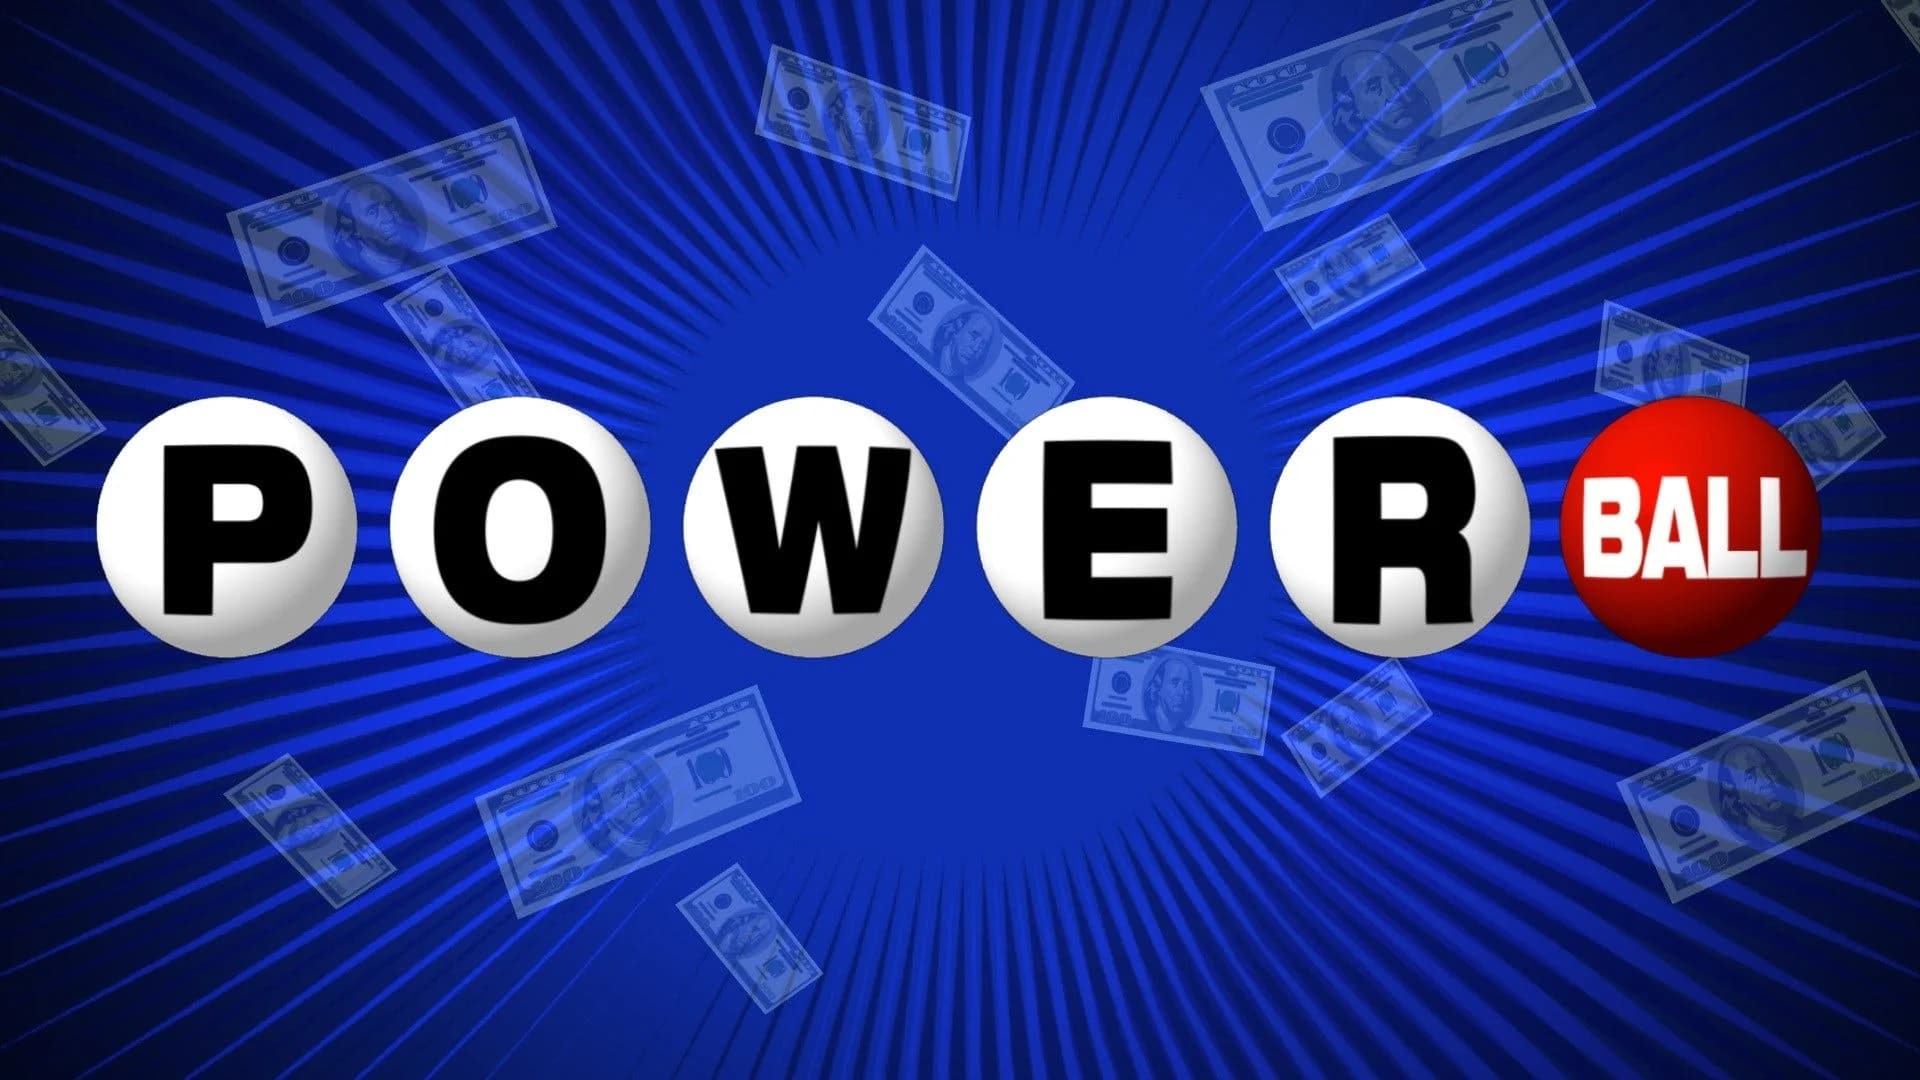 Lucky in love? Powerball jackpot hits $242M ahead of Valentine’s Day